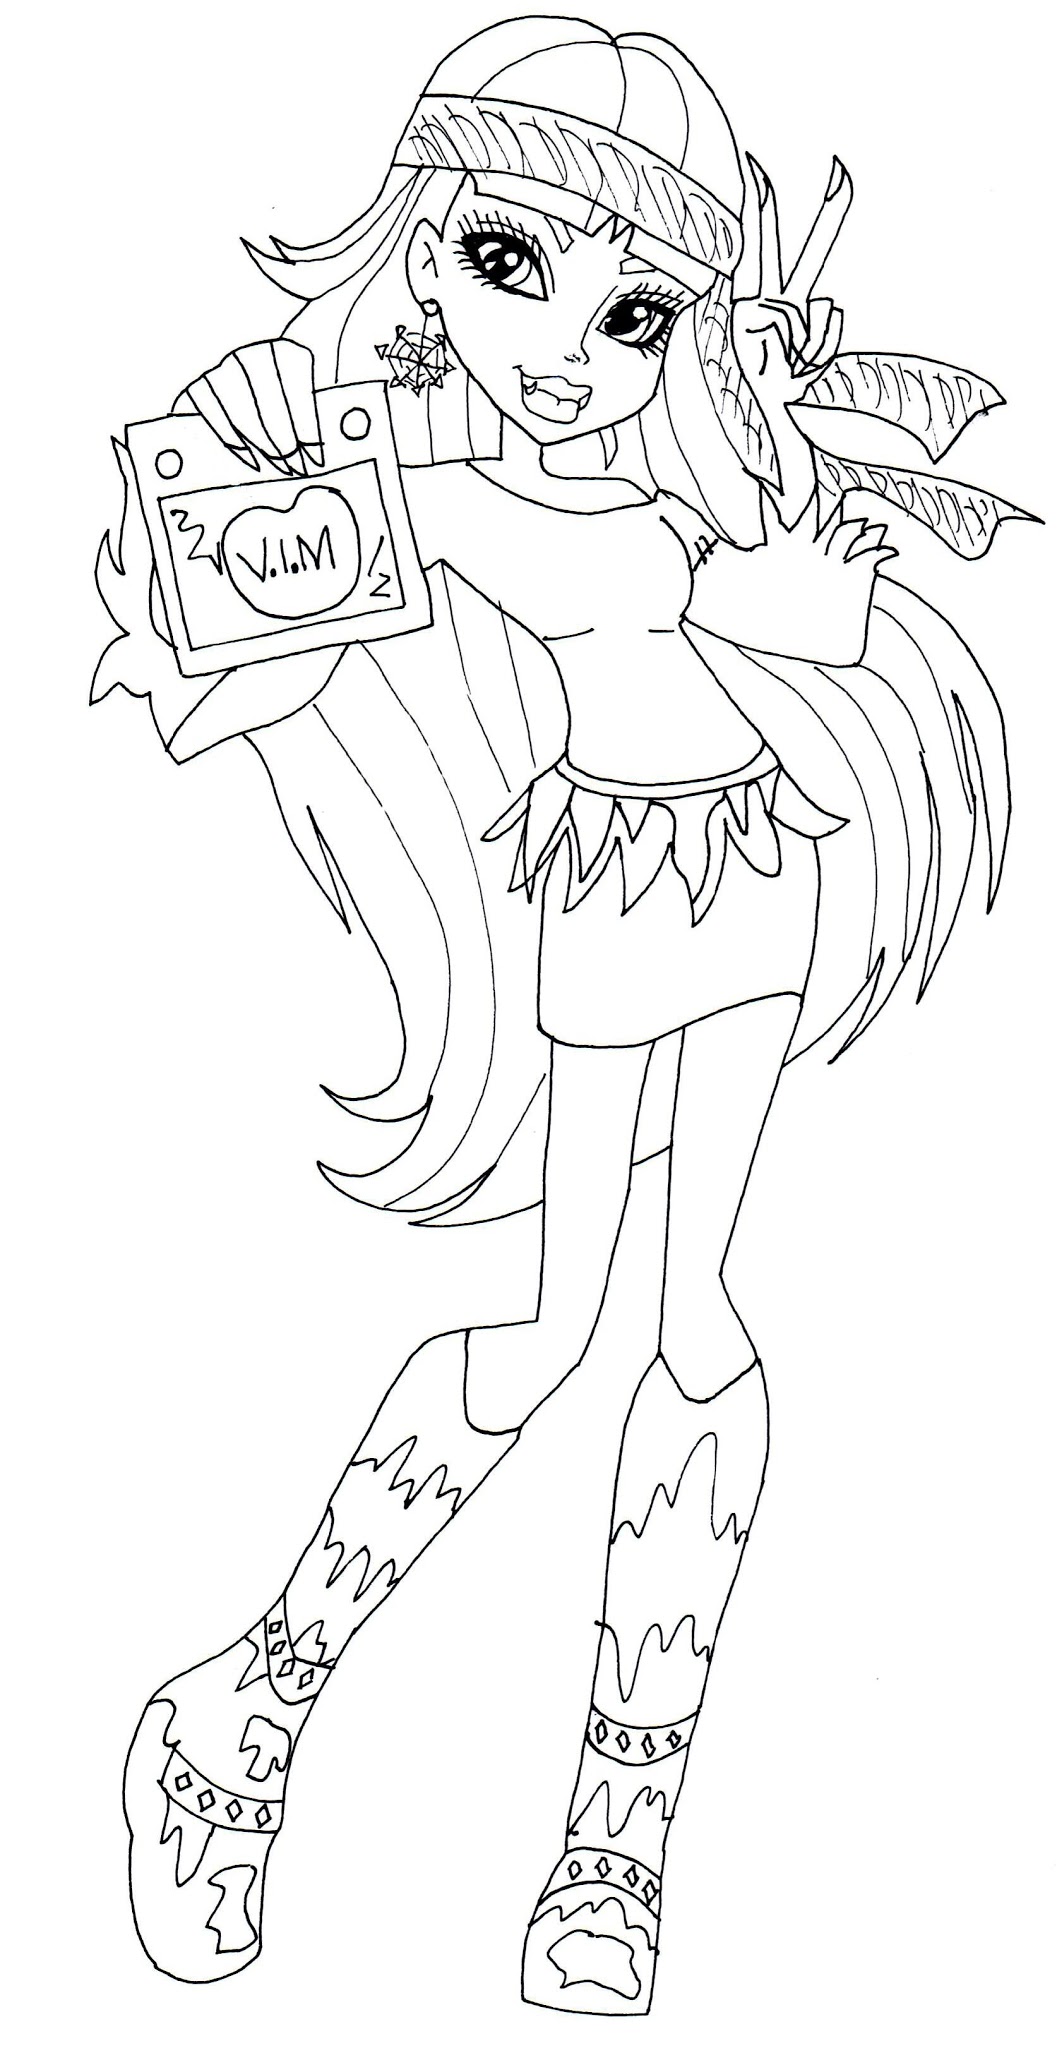 name creator coloring pages - photo #23